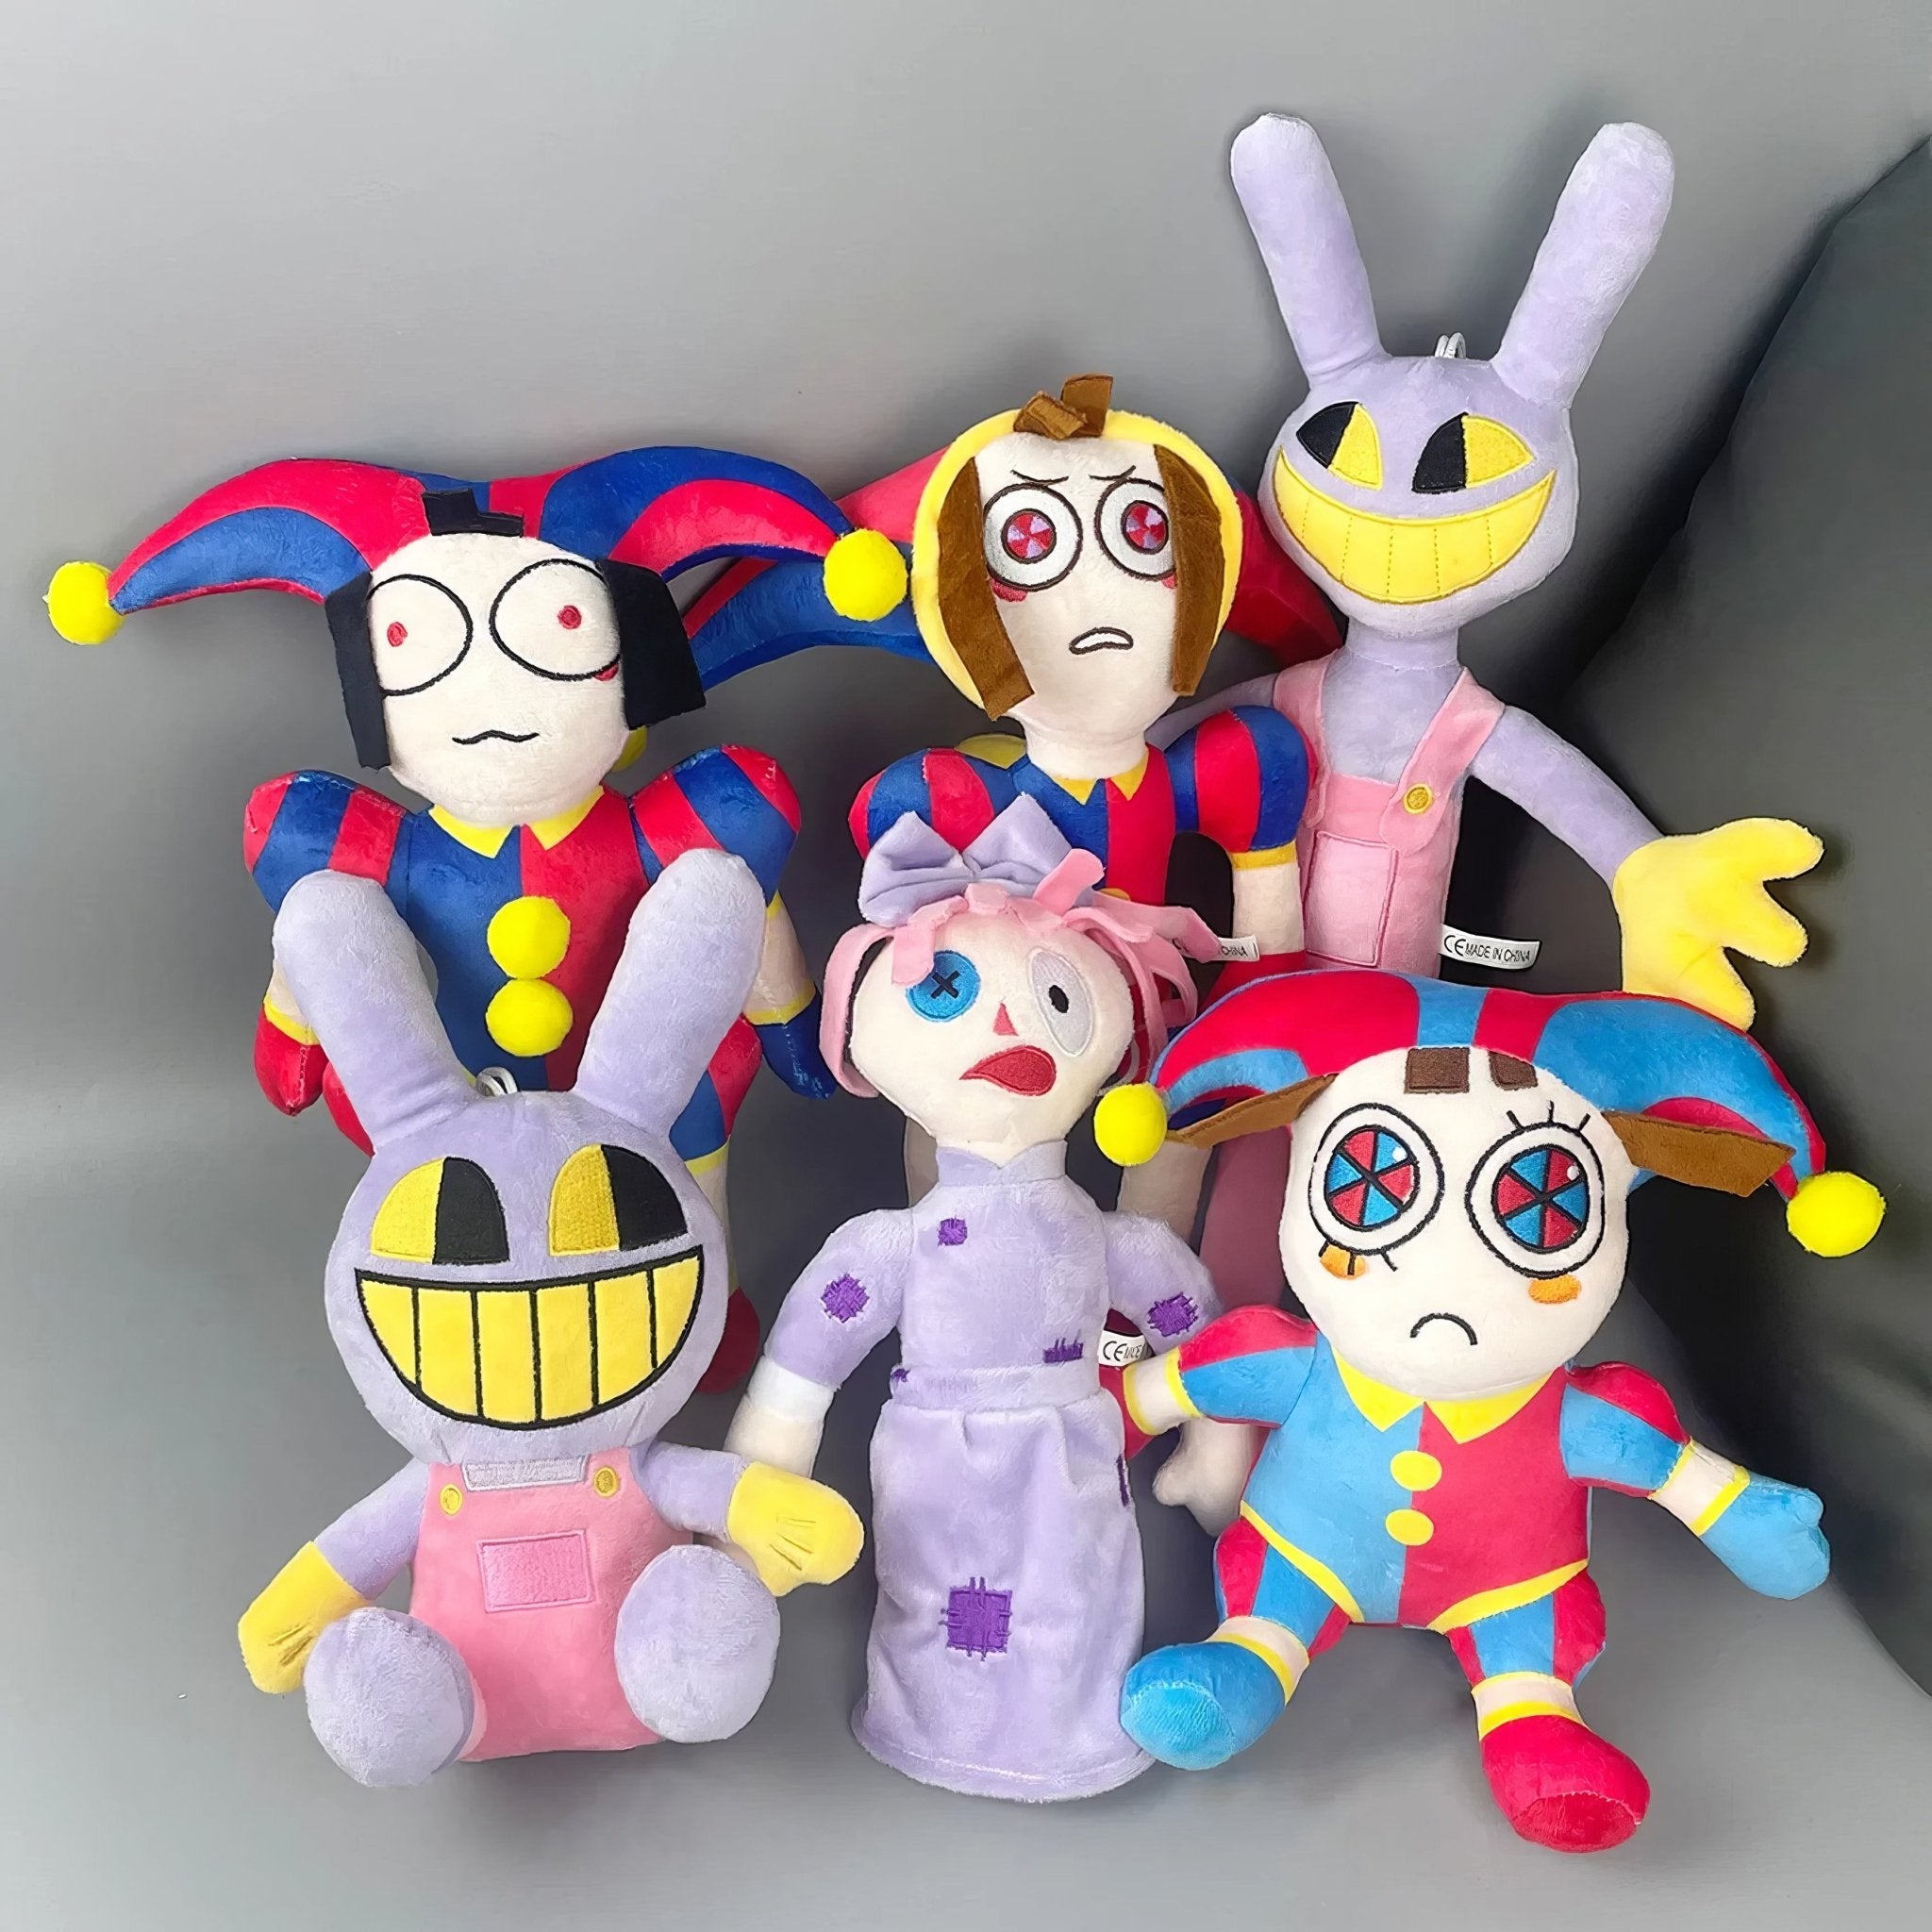 The Amazing Digital Circus Plush Toys, Pomni&Jax Plushies Toy for TV Fans  Gift, Cute Stuffed Figure Pomni Jax Doll for Kids and Adults Birthday